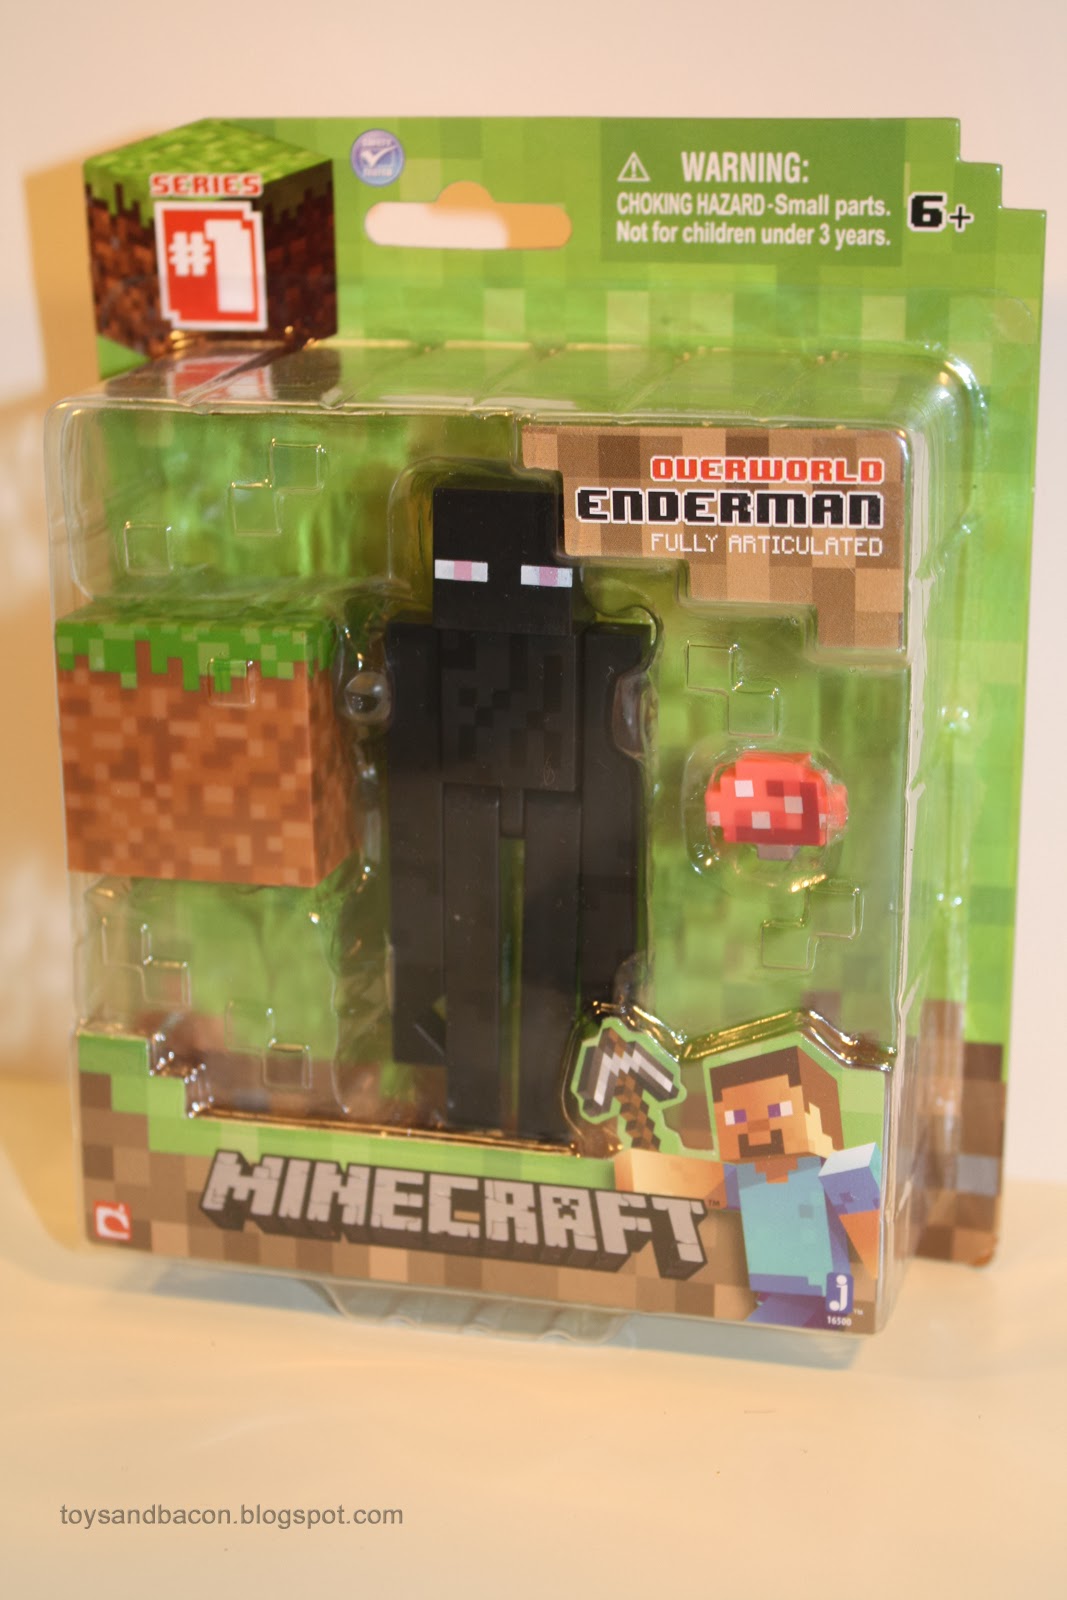 Toys and Bacon: Minecraft Action Figures - A review...?